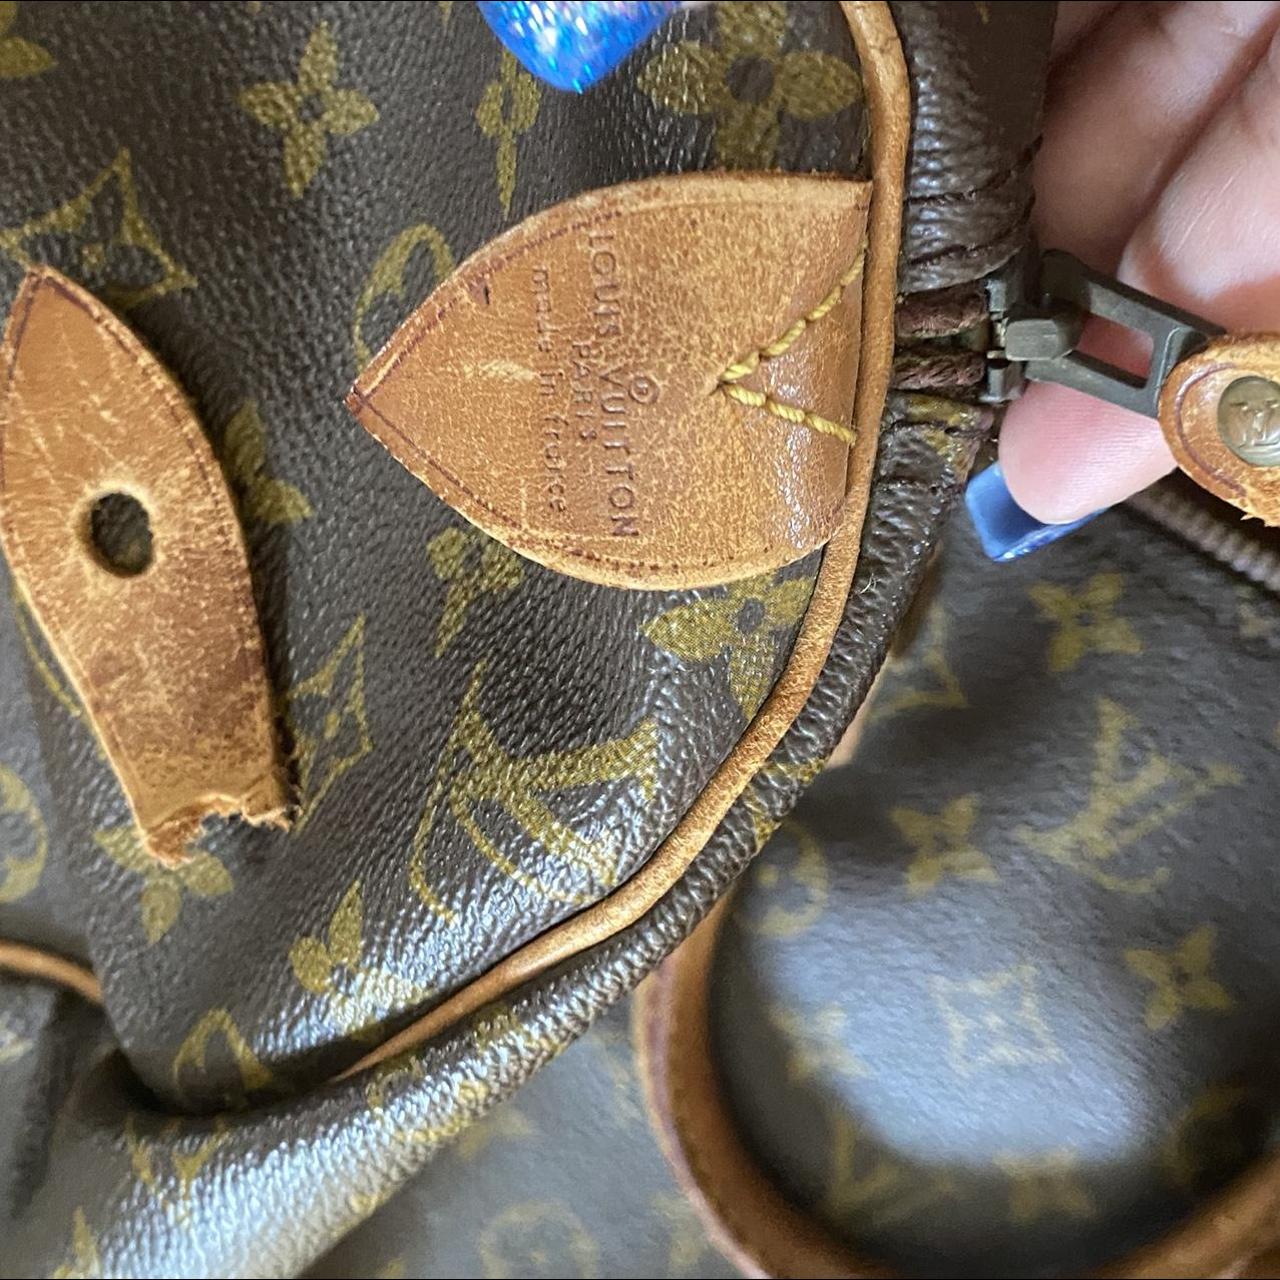 Vintage and Vampires ™: Louis Vuitton Speedy 35, but which style?